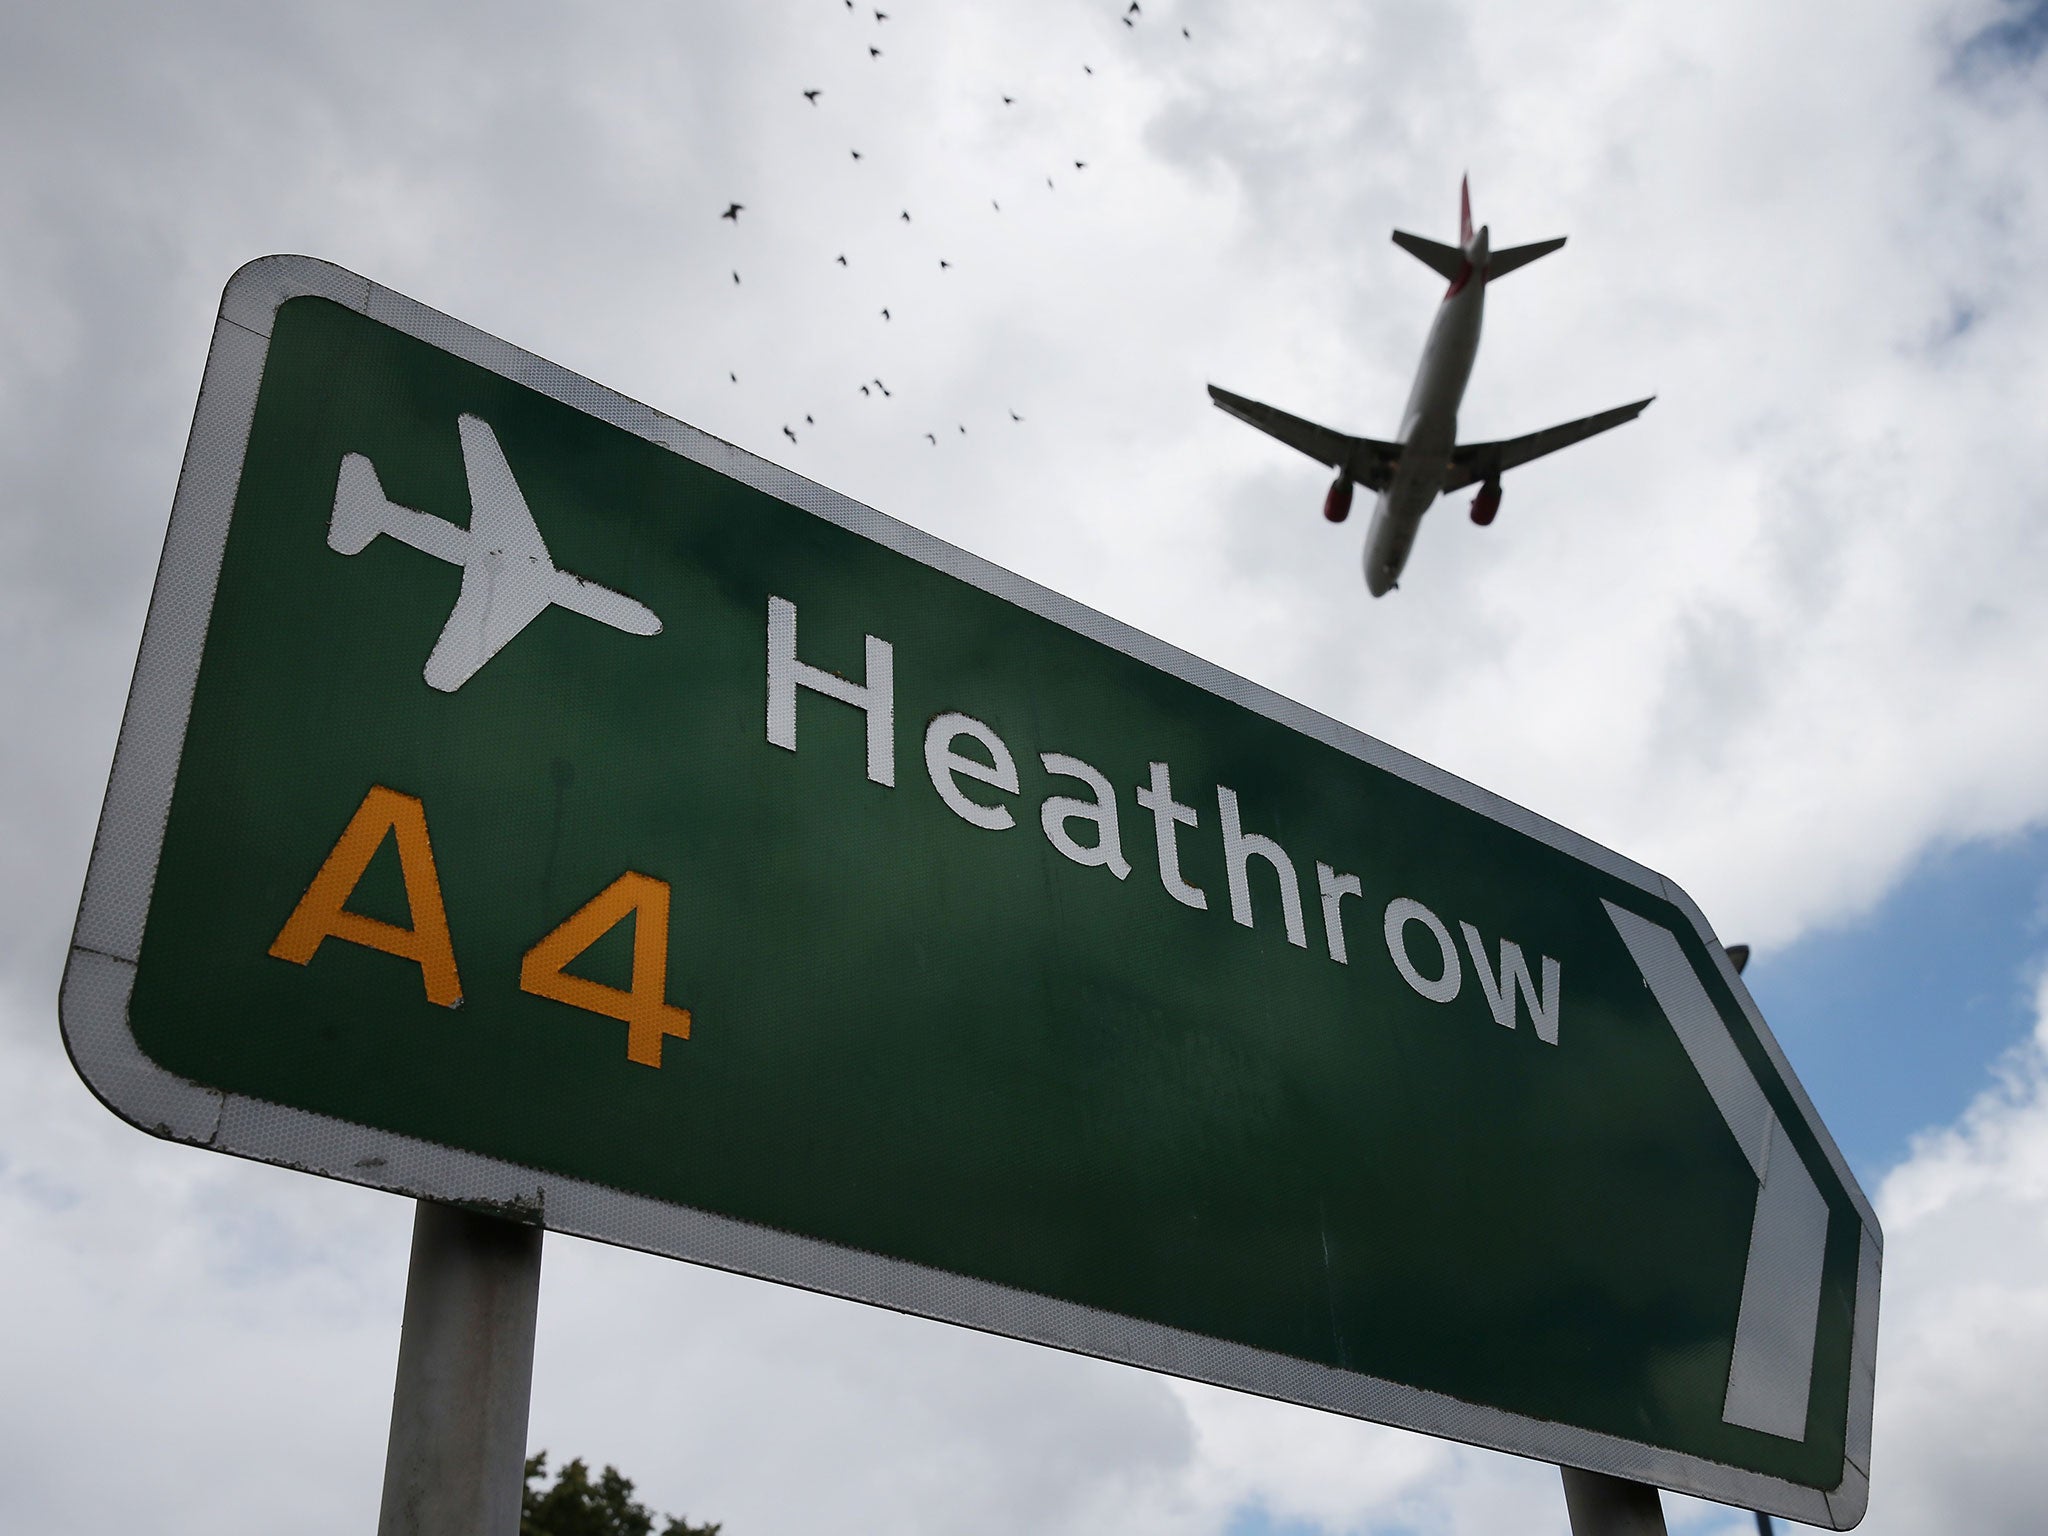 Heathrow may have to drop domestic routes if expansion plans are turned down